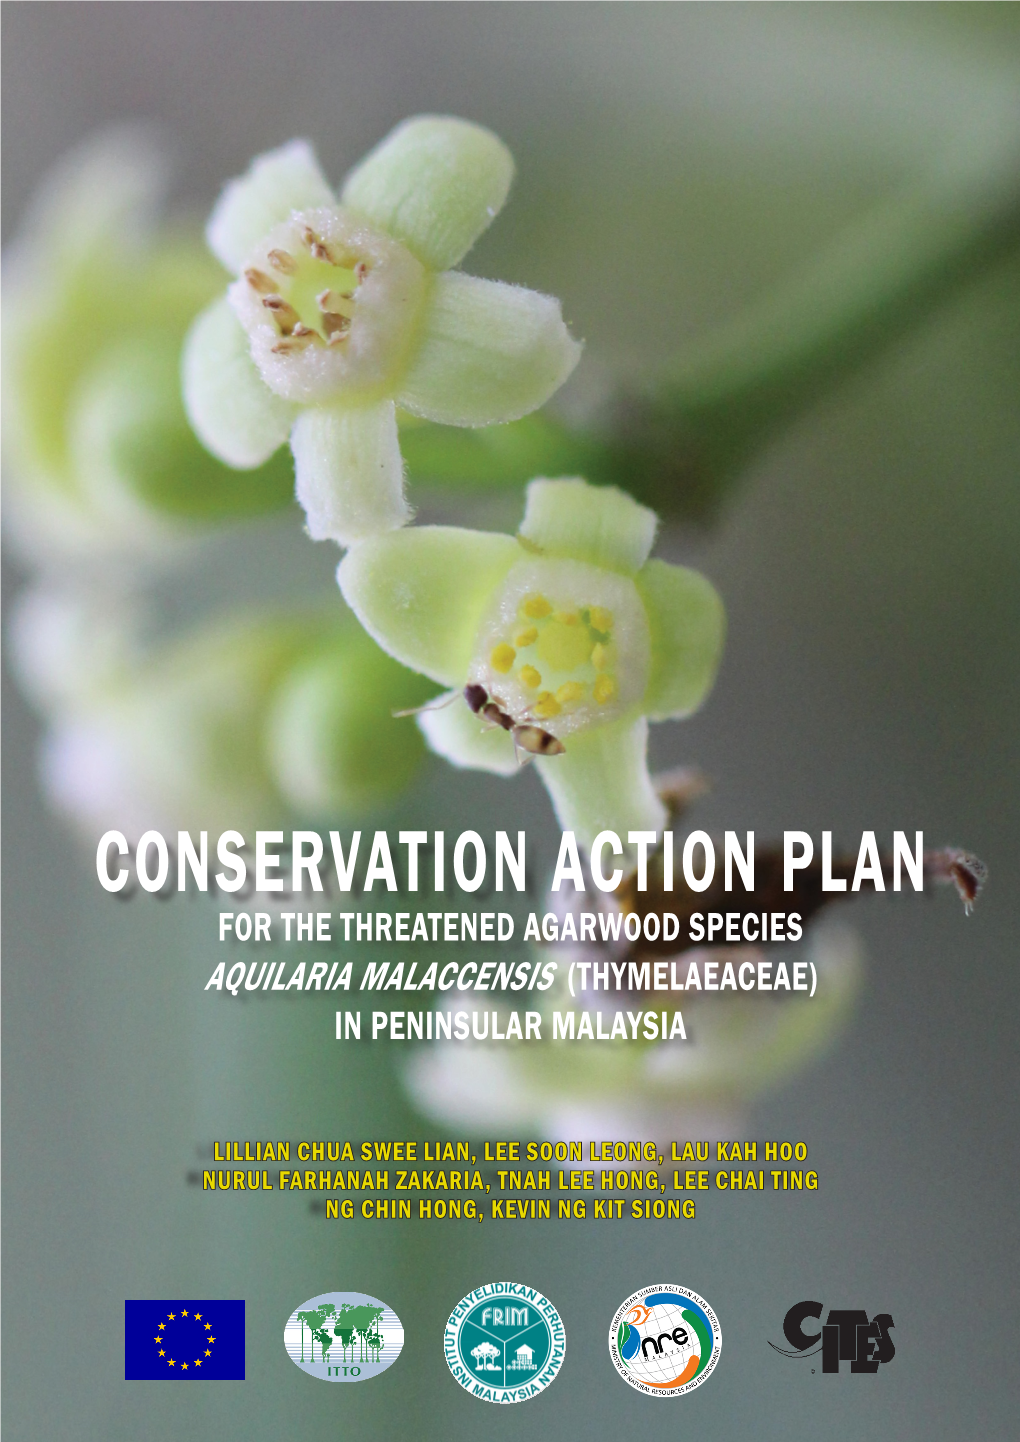 Conservation Action Plan for the Threatened Agarwood Species Aquilaria Malaccensis (Thymelaeaceae) in Peninsular Malaysia